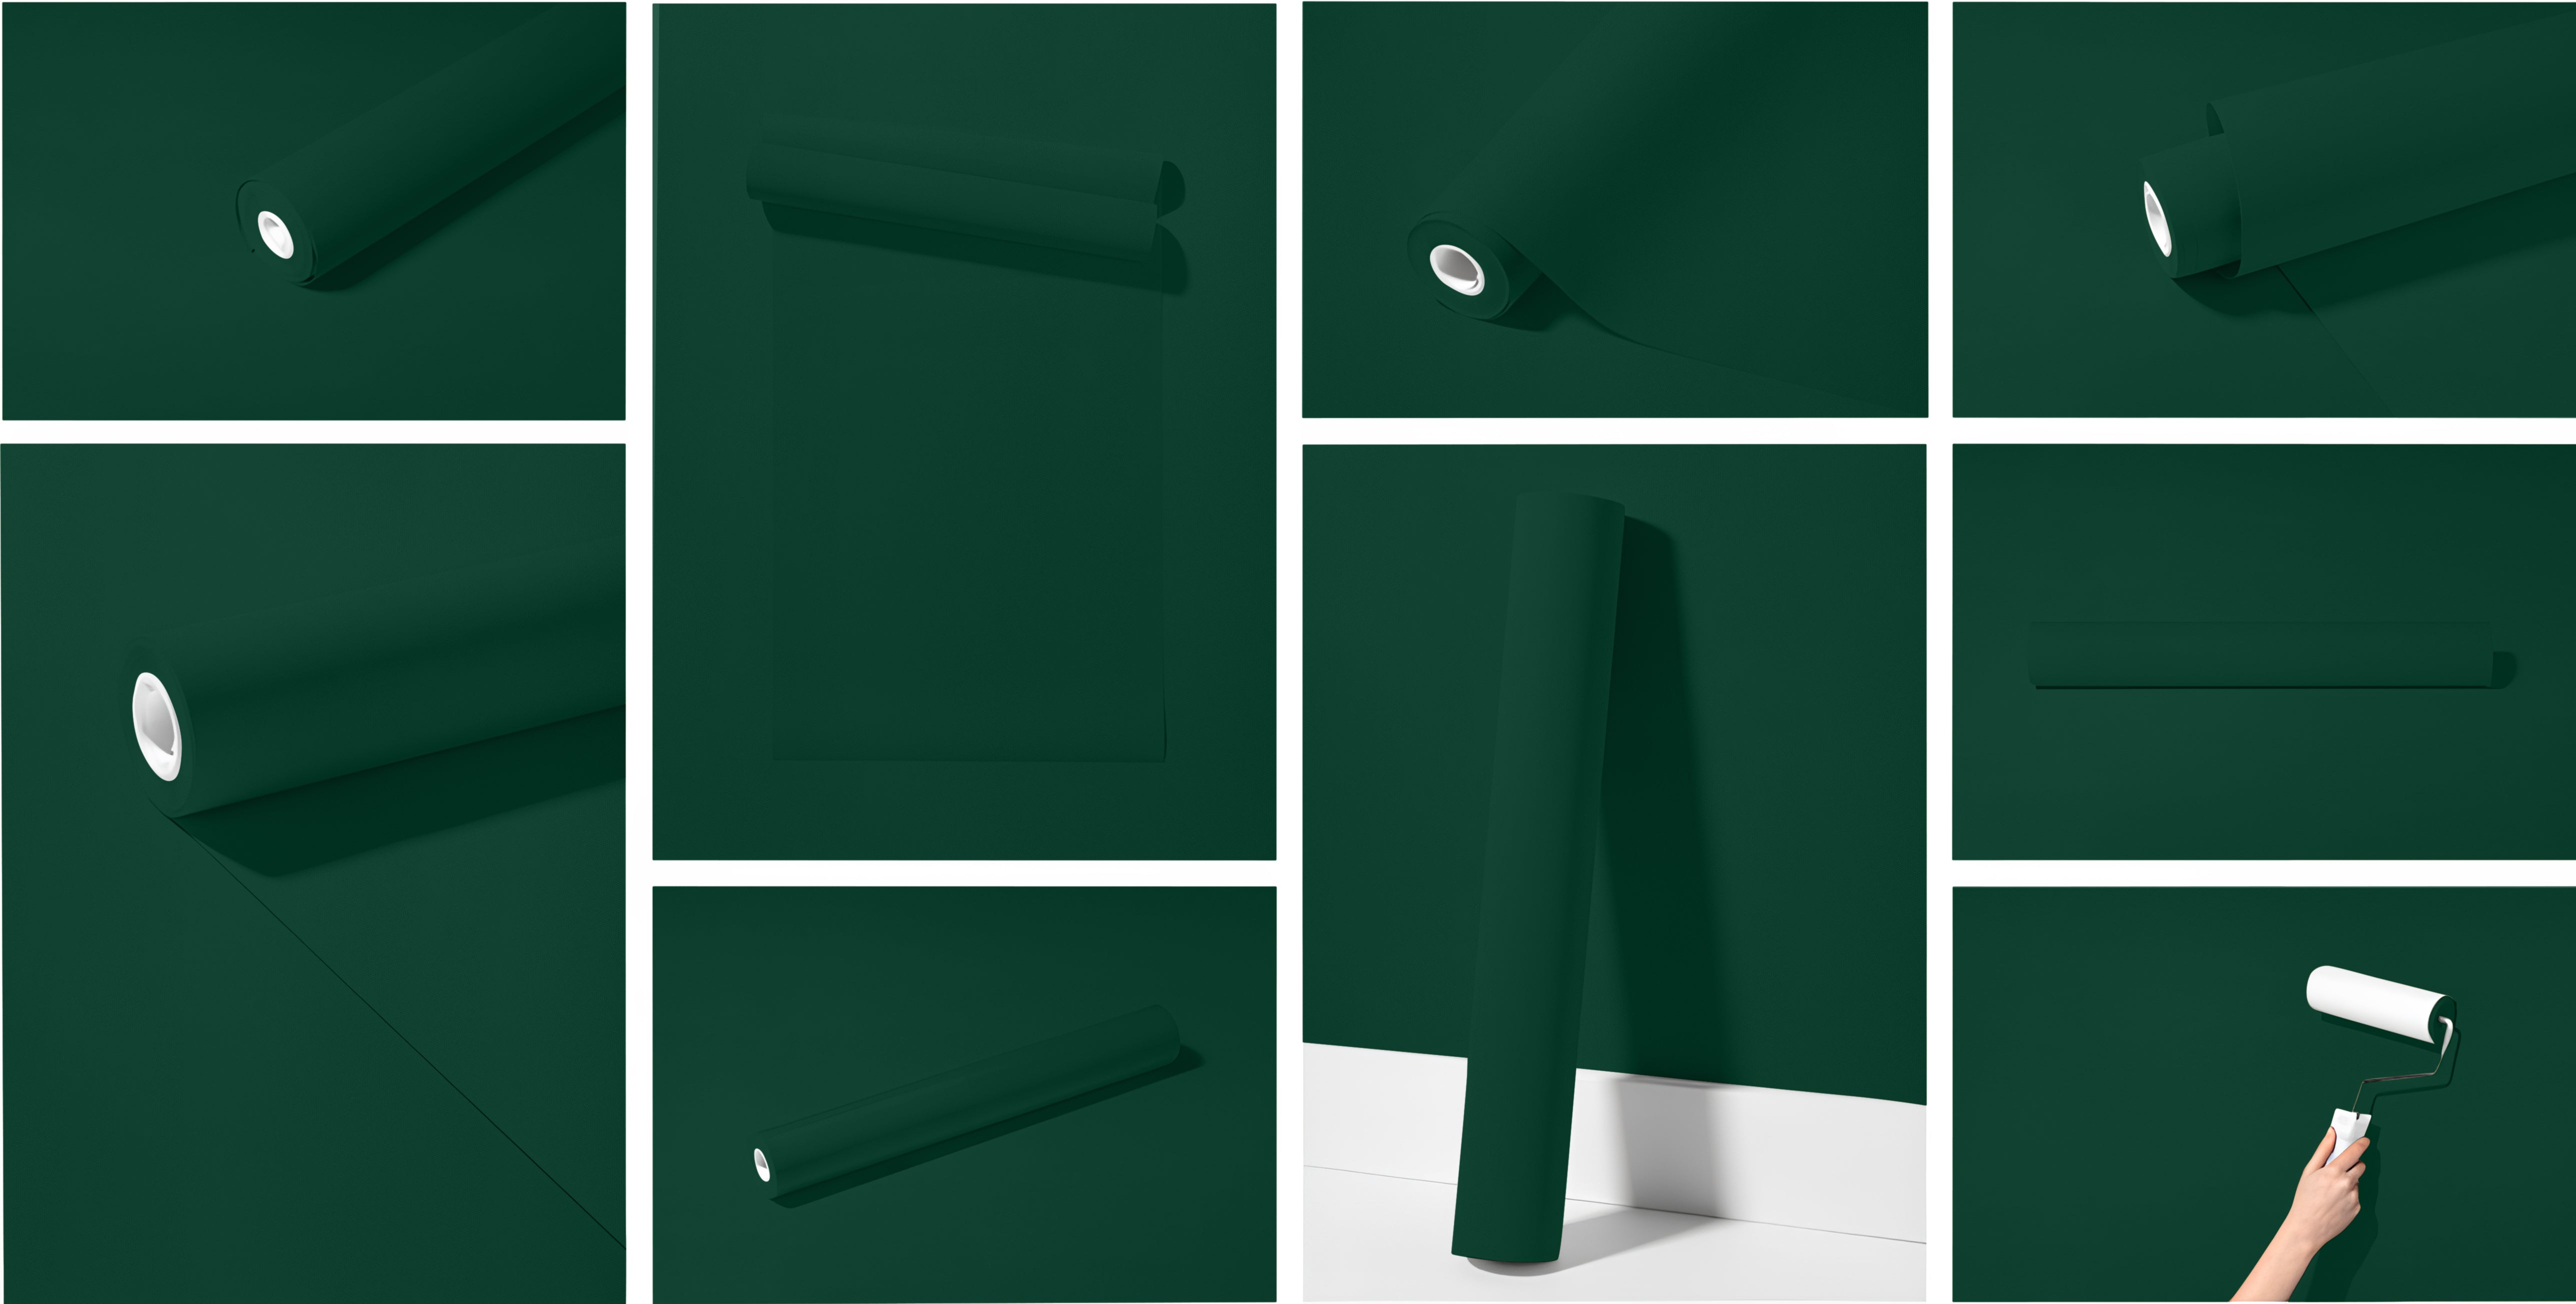 Peel & Stick Removable Re-usable Paint - Color RAL 6005 Moss Green - offRAL™ - RALRAW LLC, USA